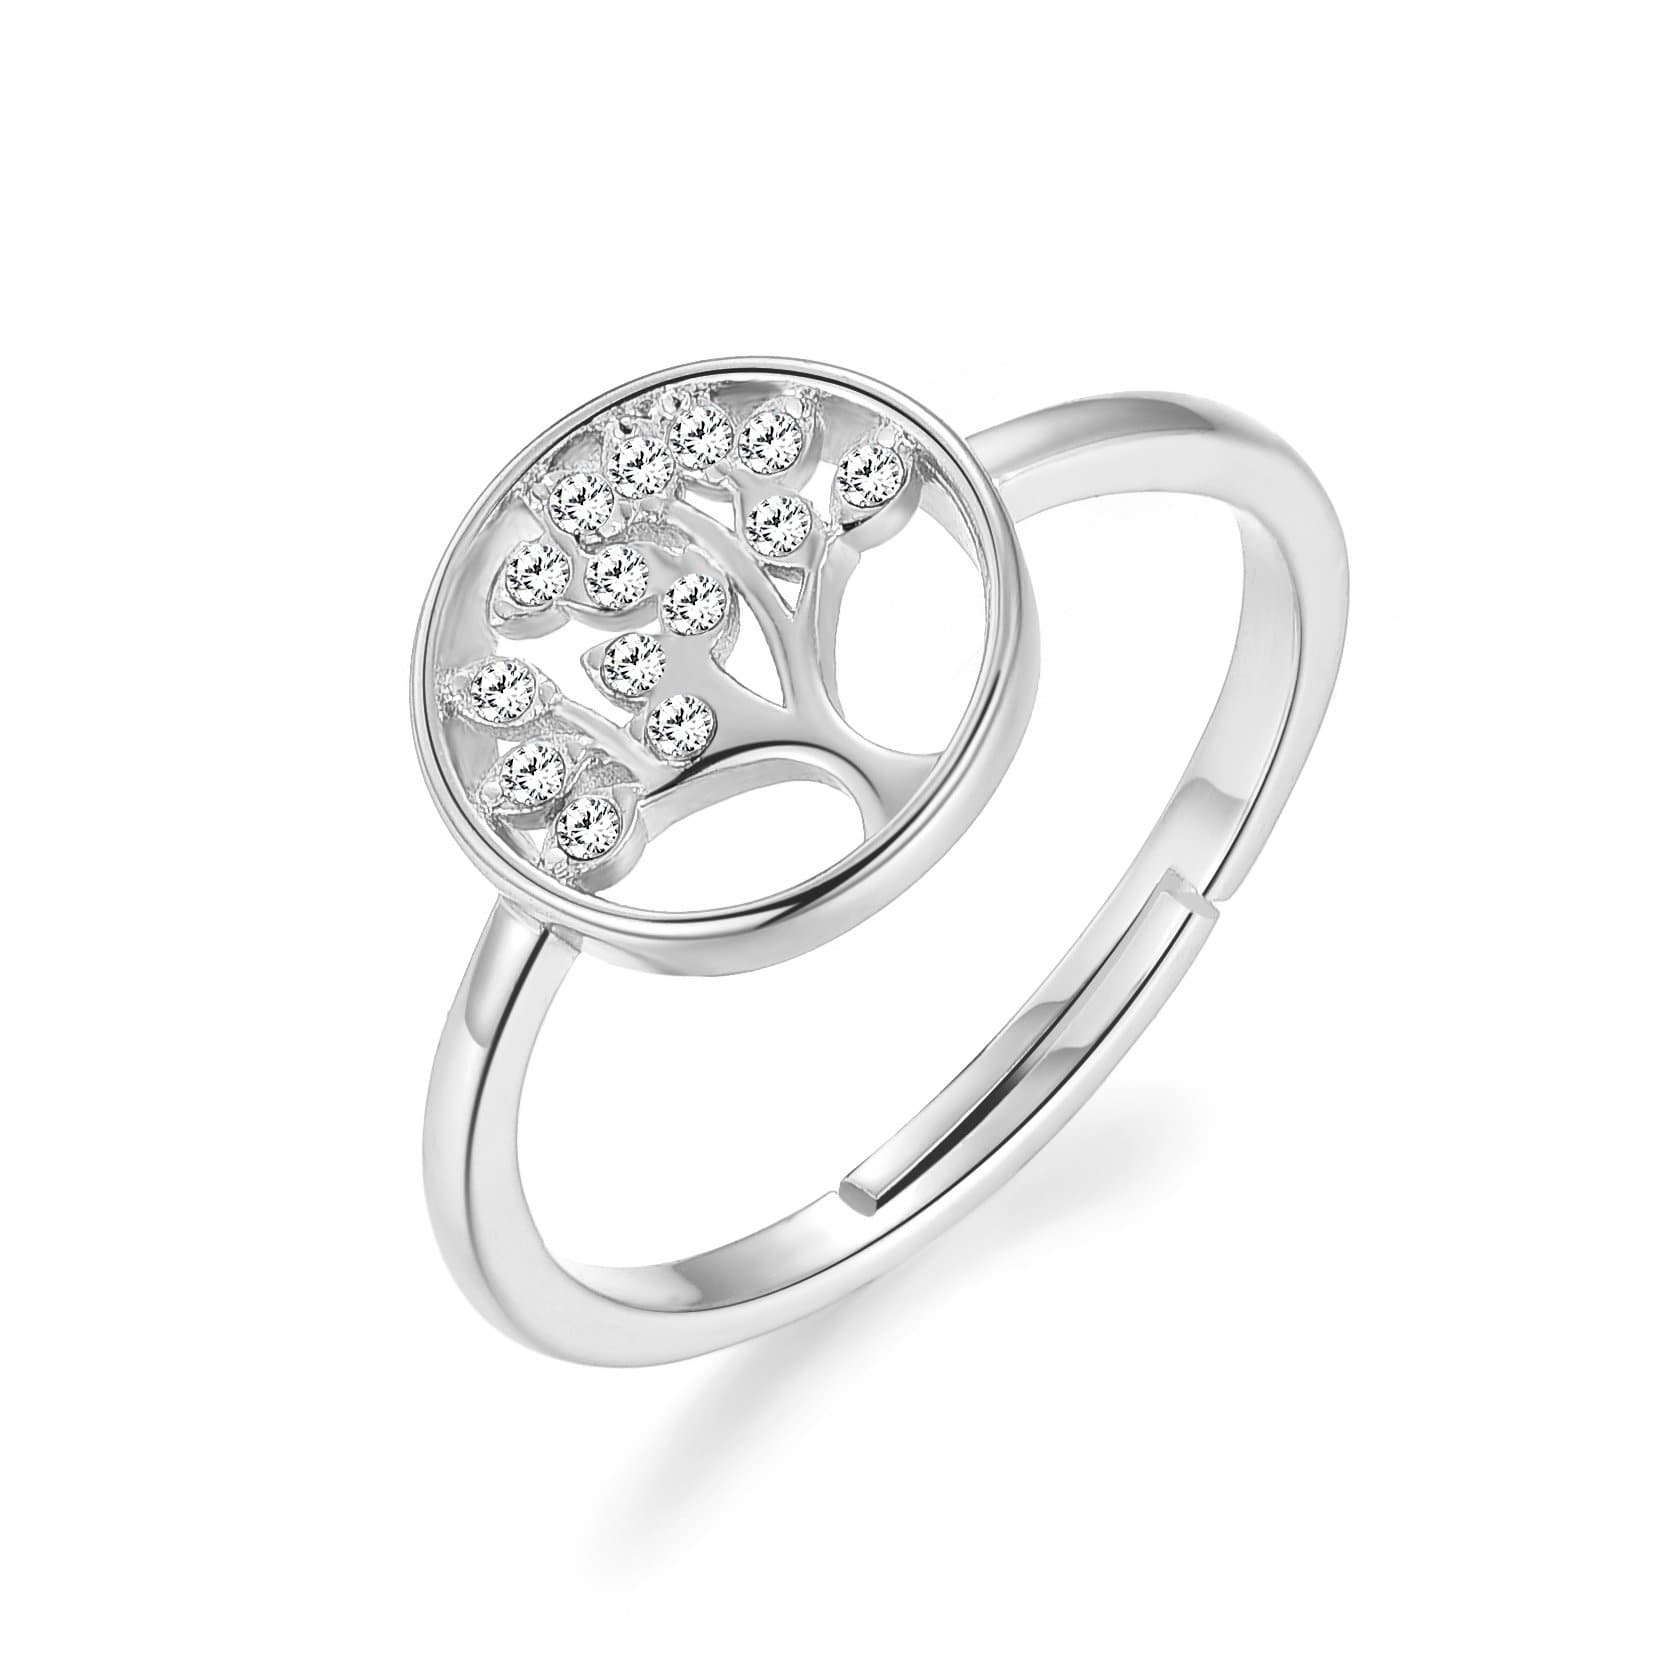 Silver Plated Tree of Life Ring Created with Zircondia® Crystals by Philip Jones Jewellery